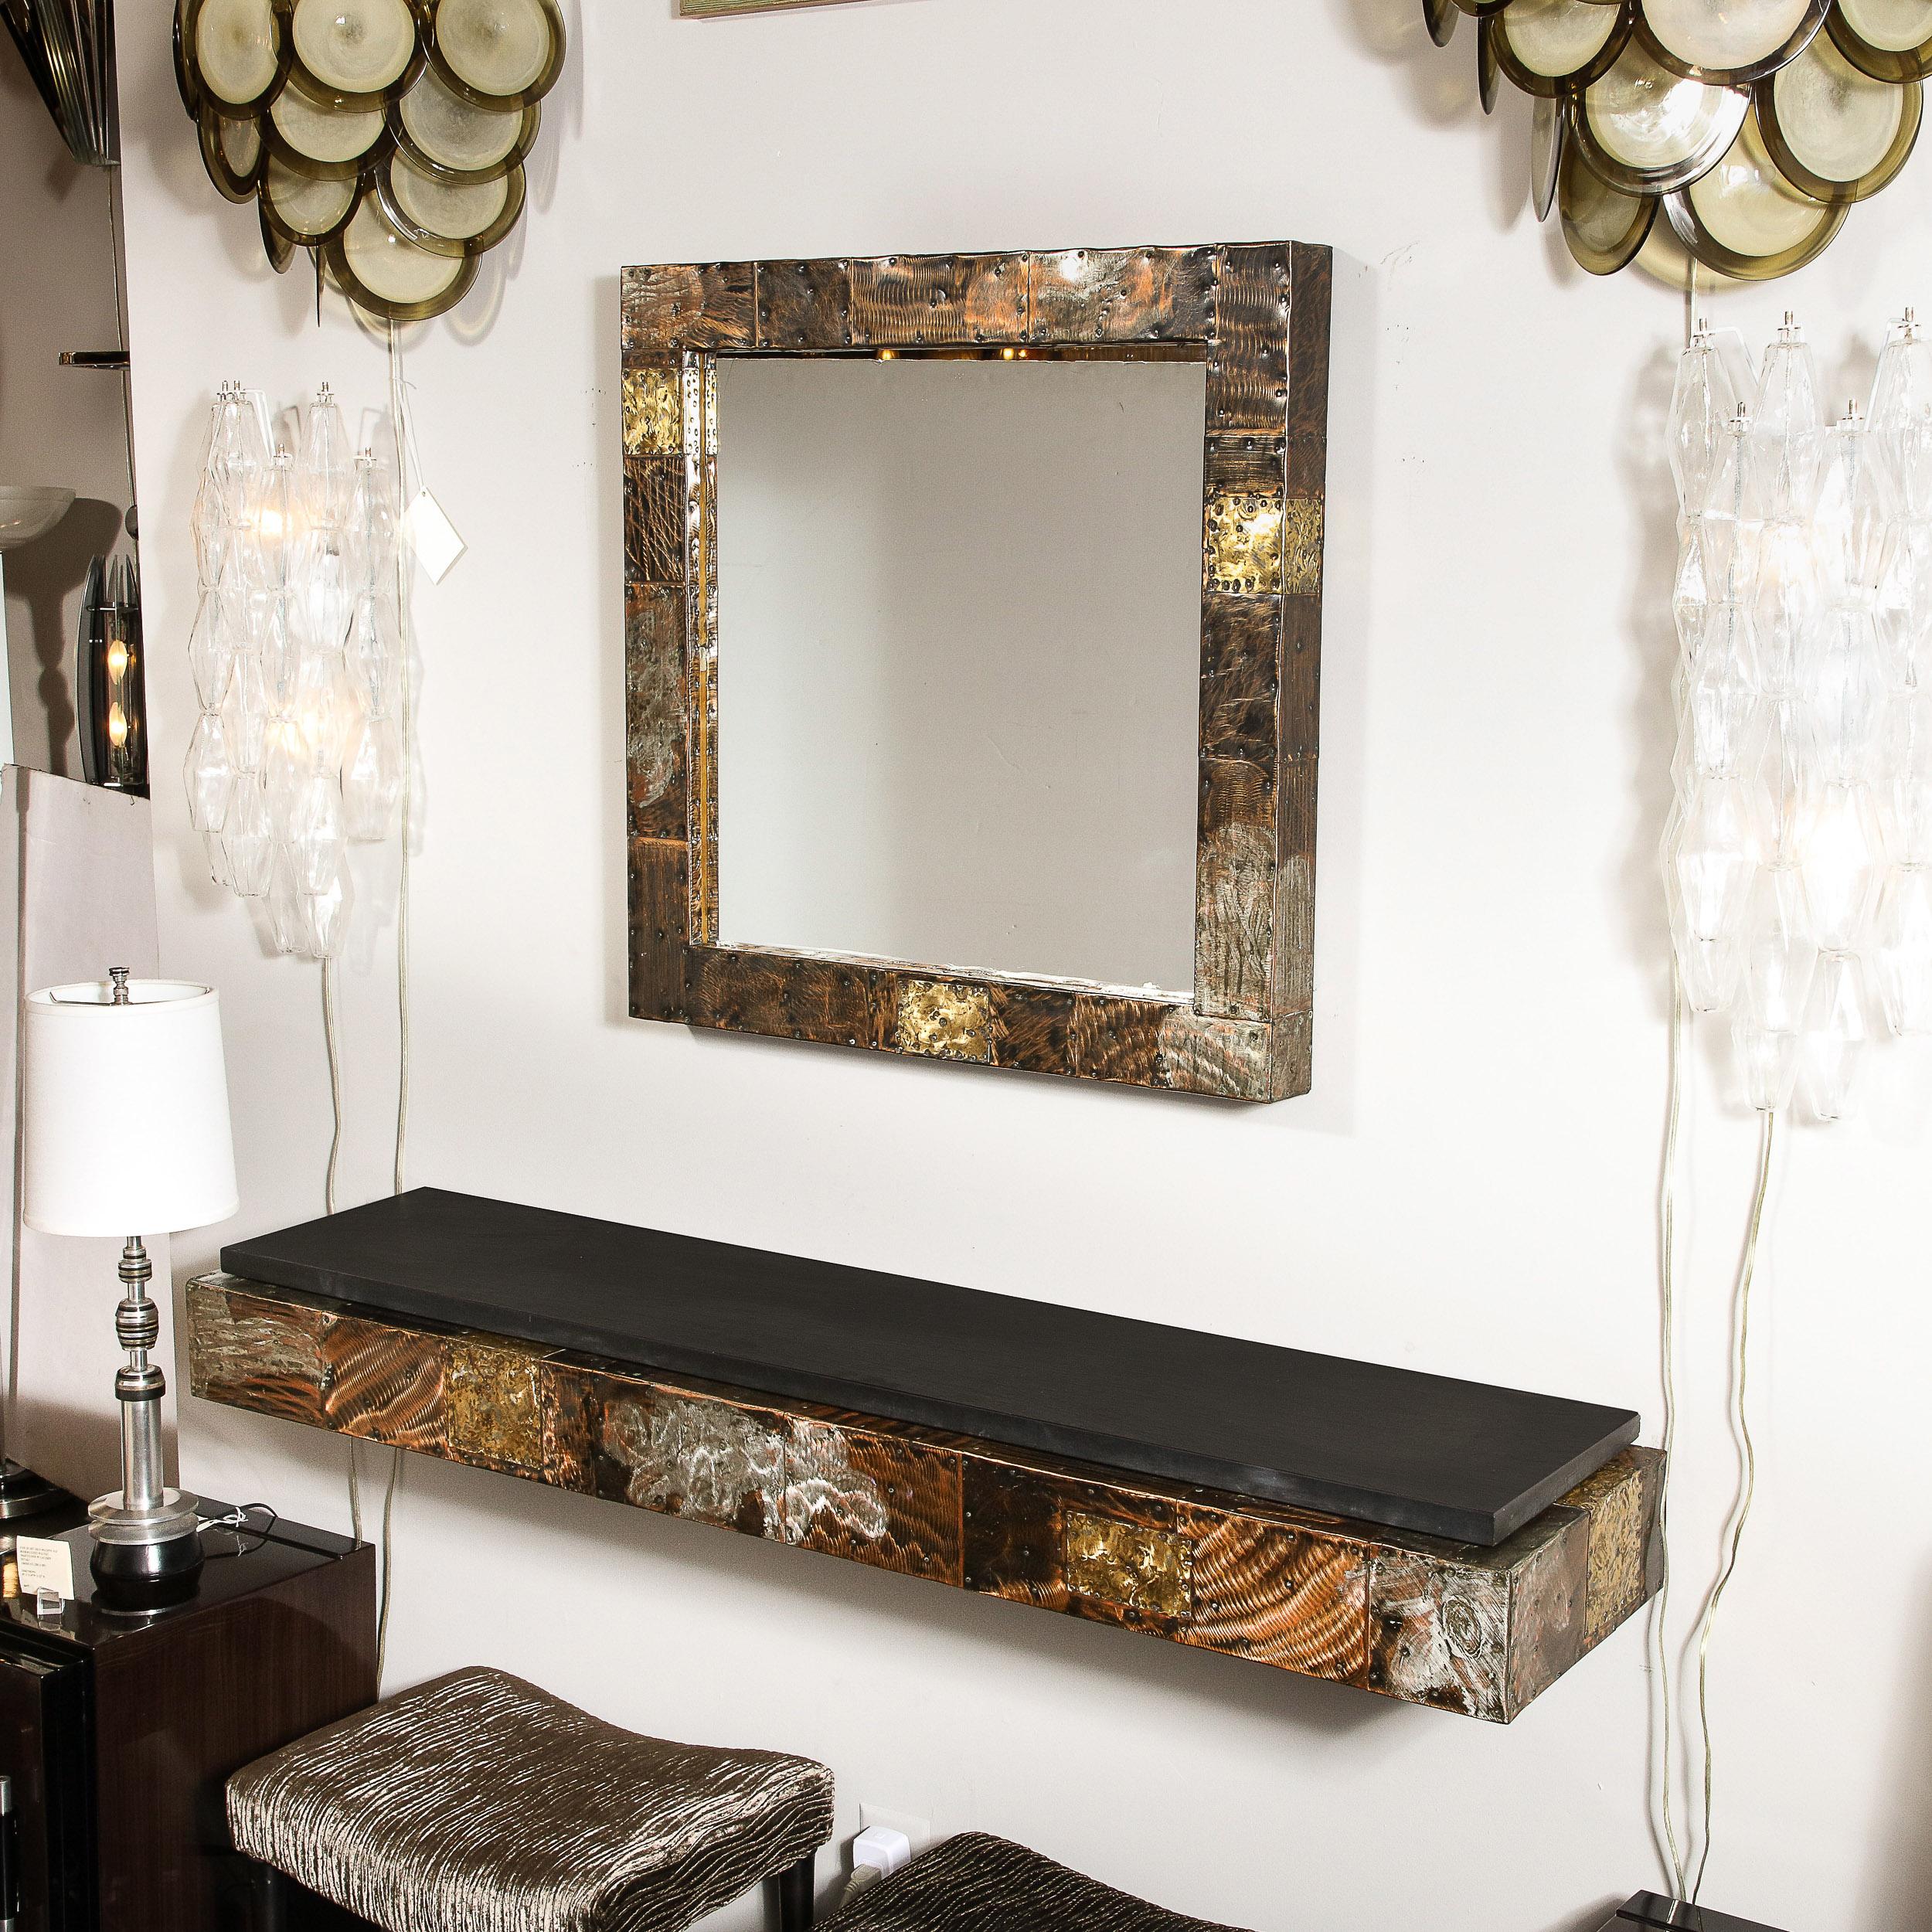 American Mid-Century Brutalist Patchwork Mirror and Wall Mounted Console by Paul Evans